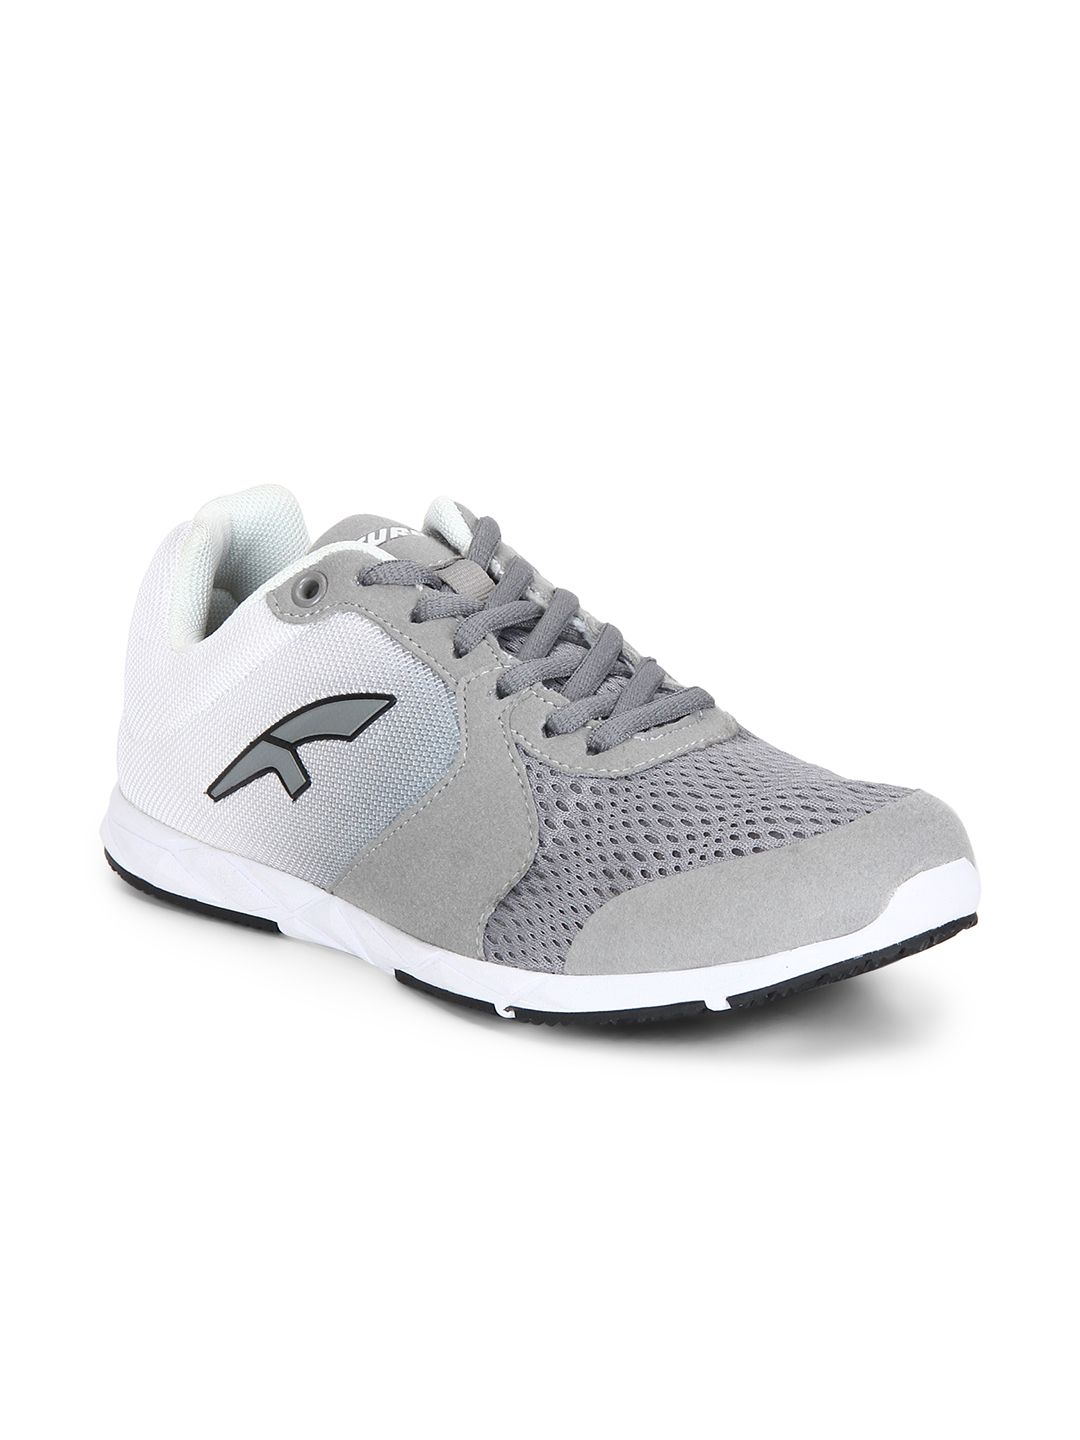 FURO by Red Chief Women Grey & Off-White Running Shoes Price in India